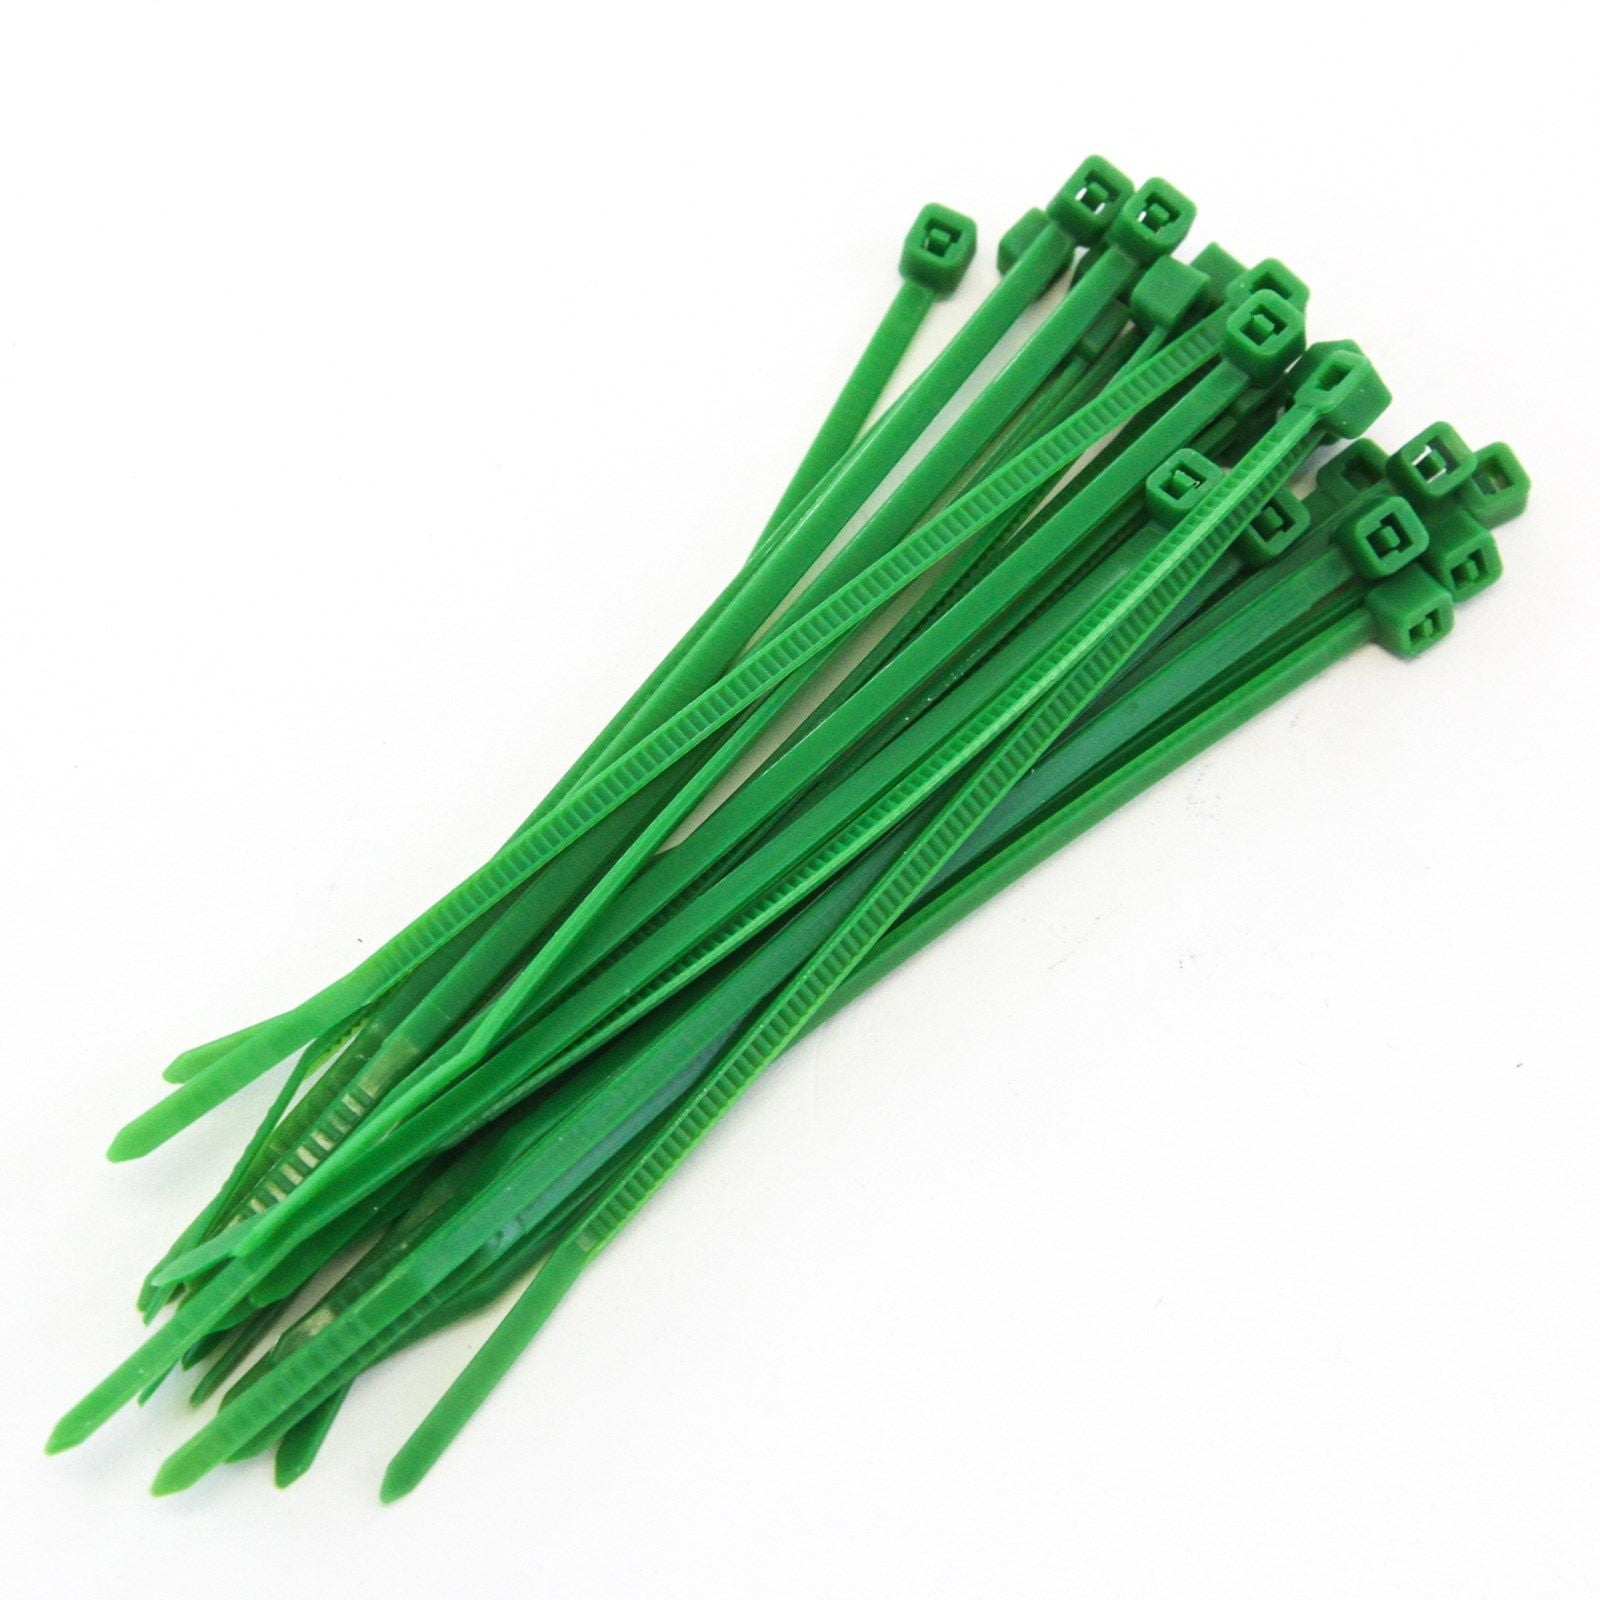 HIGH QUALITY HEAVY DUTY TIES ALL SIZES GREEN PLASTIC CABLE TIES WIRE TIES